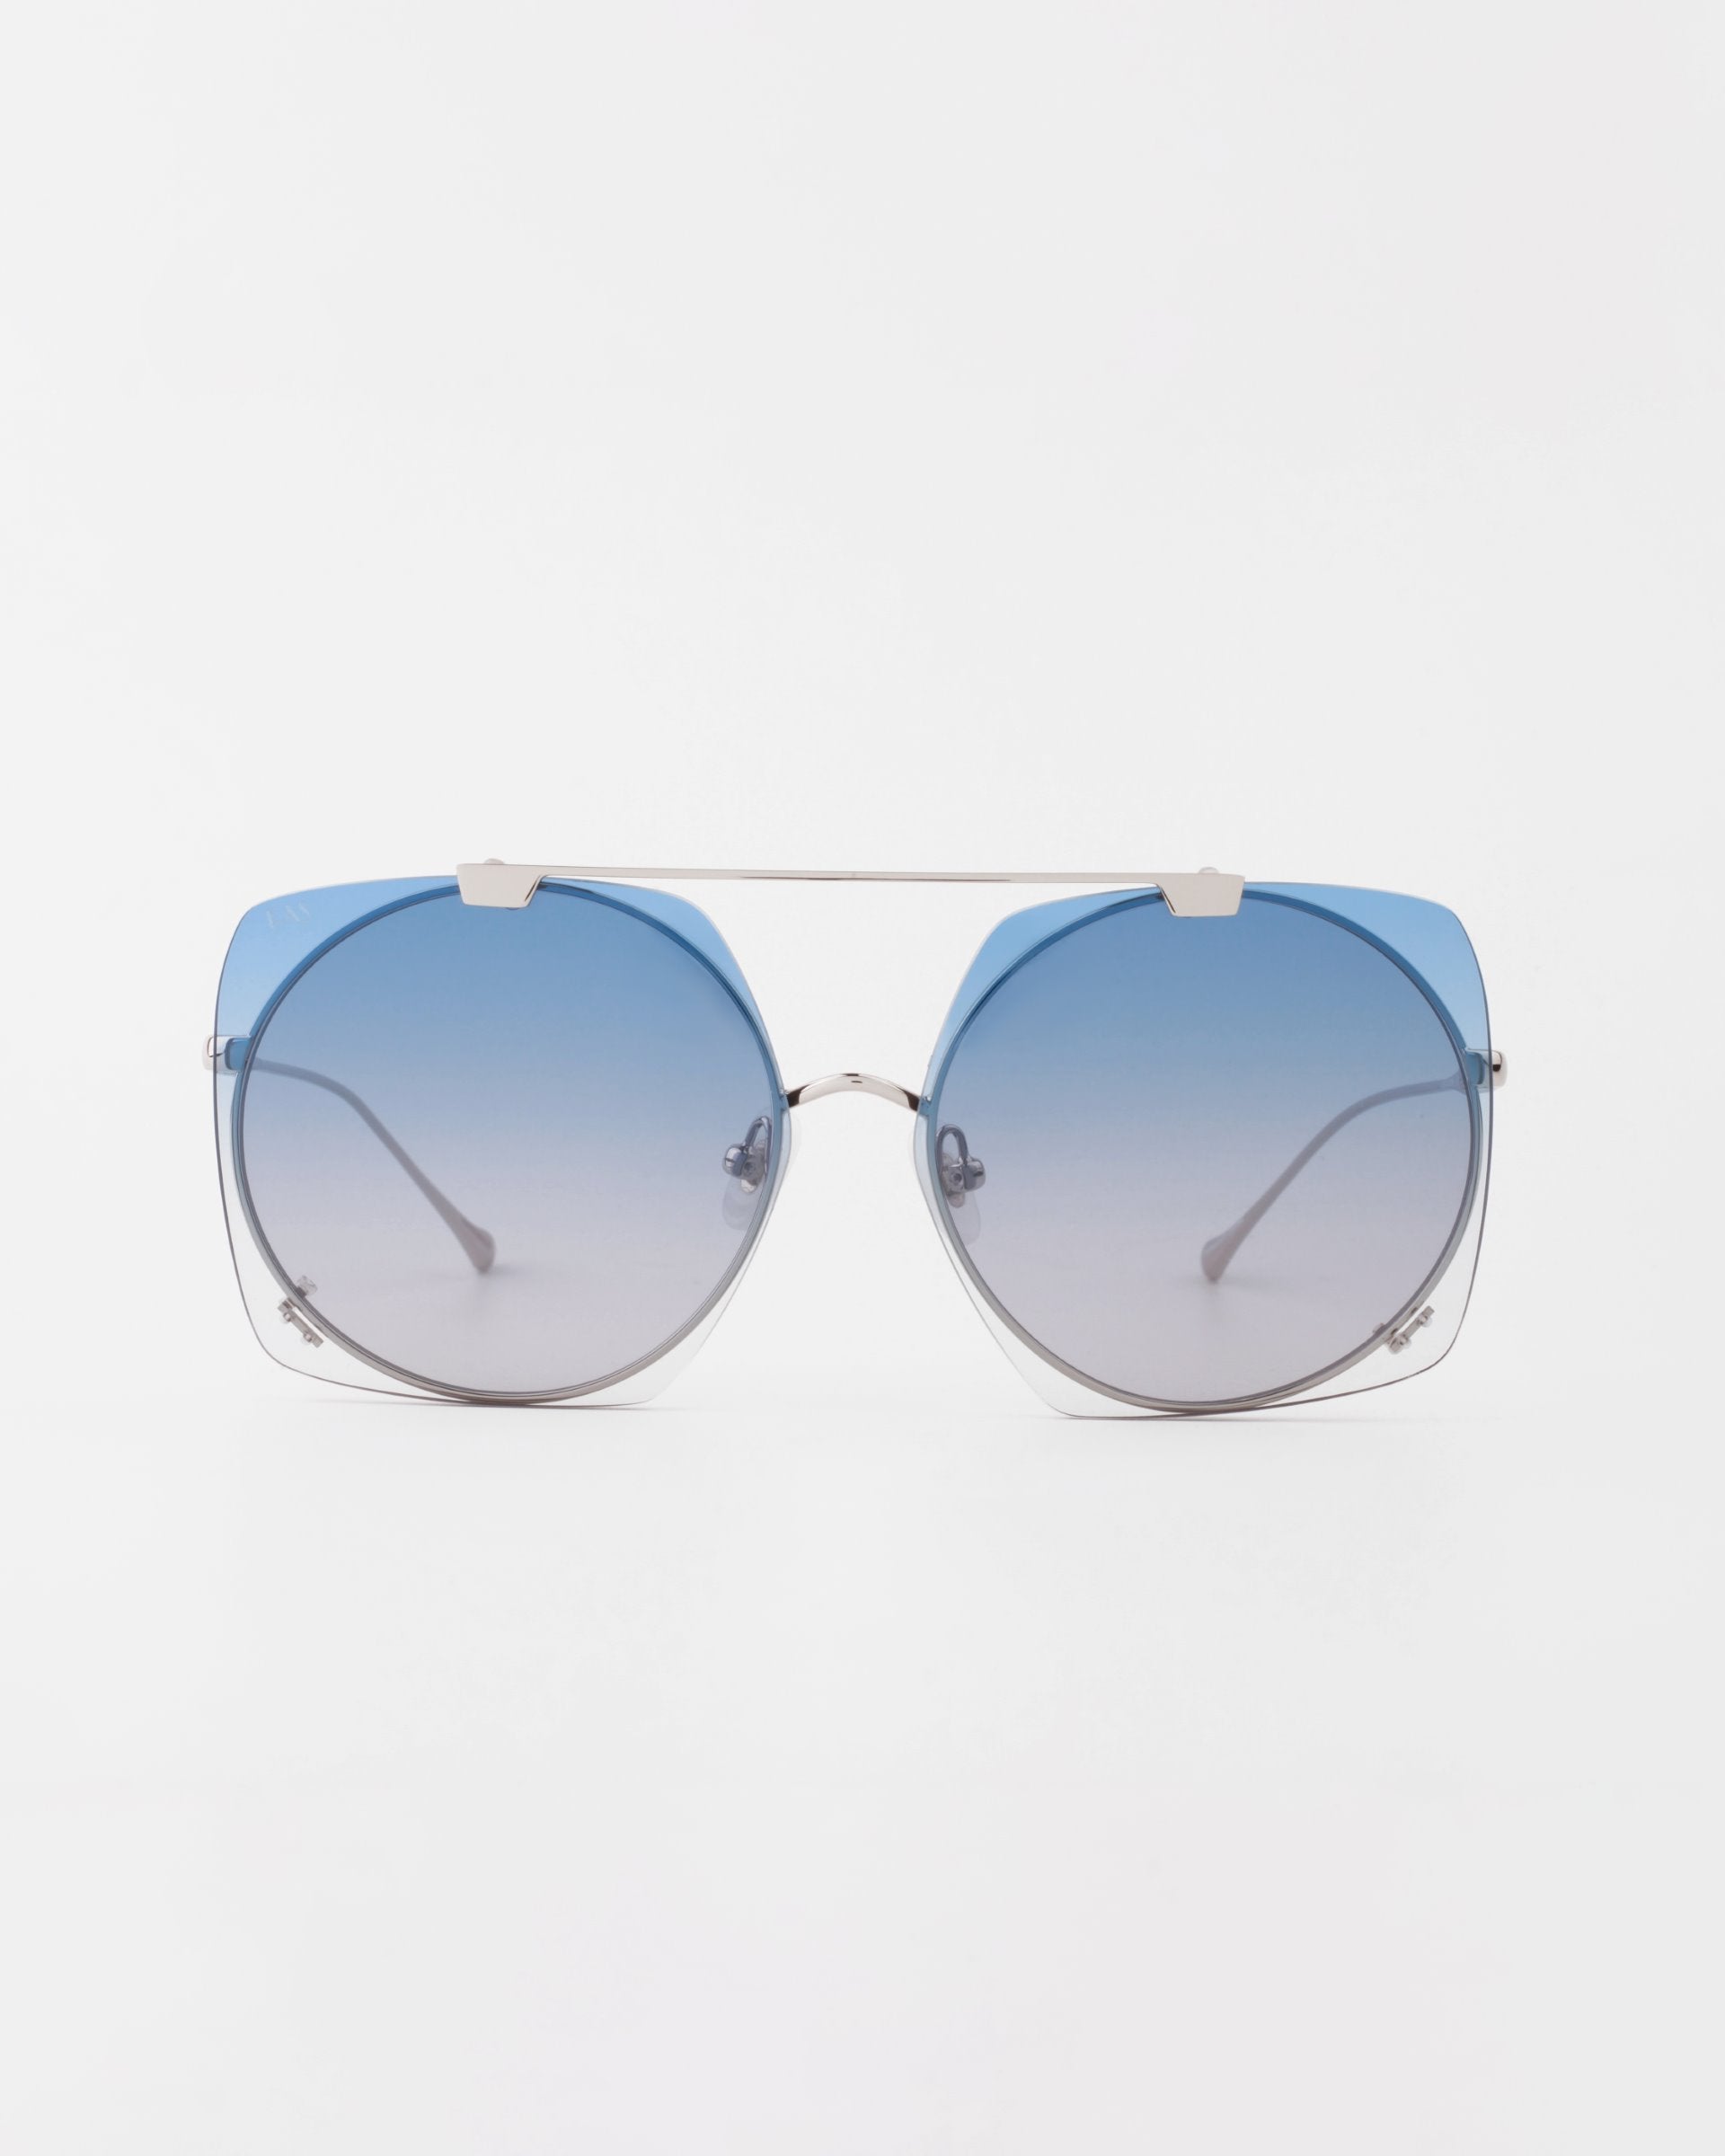 A pair of stylish For Art's Sake® Last Summer sunglasses with large, round, gradient lenses that fade from dark blue at the top to clear at the bottom. The UVA & UVB-protected glasses feature thin, silver metal frames and a double bridge design. The background is plain white.